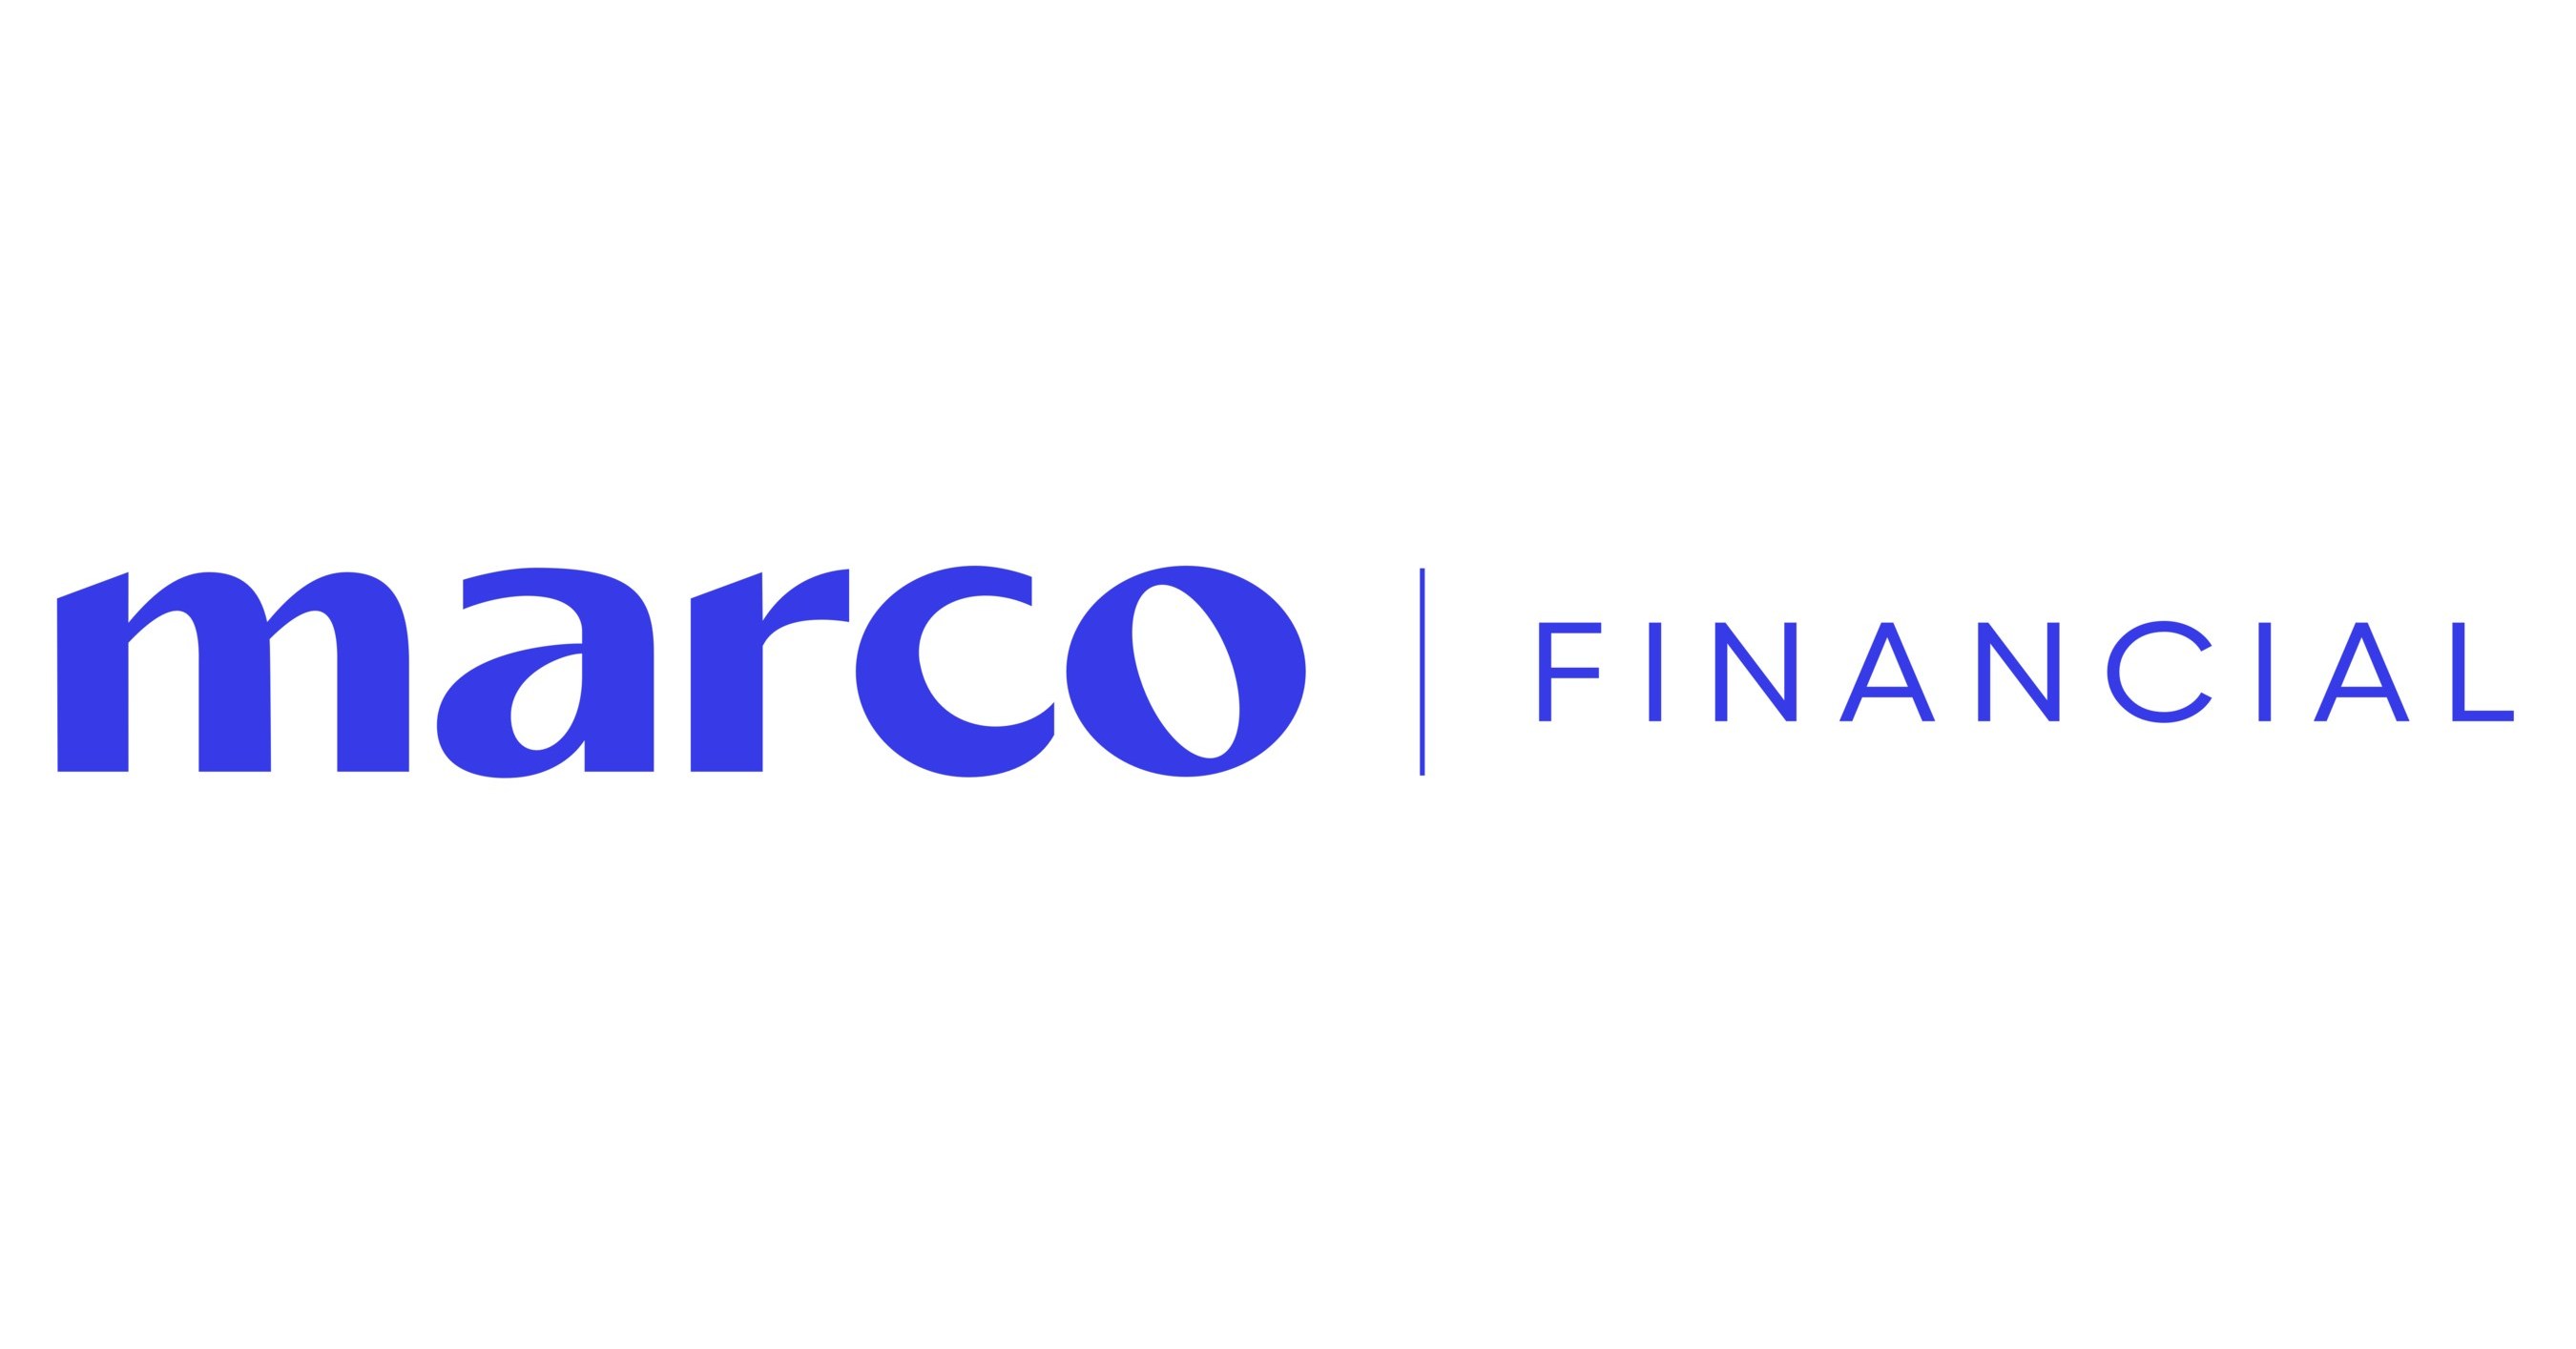 Financing Platform Marco Raises $26M to Support SMEs in Latin America